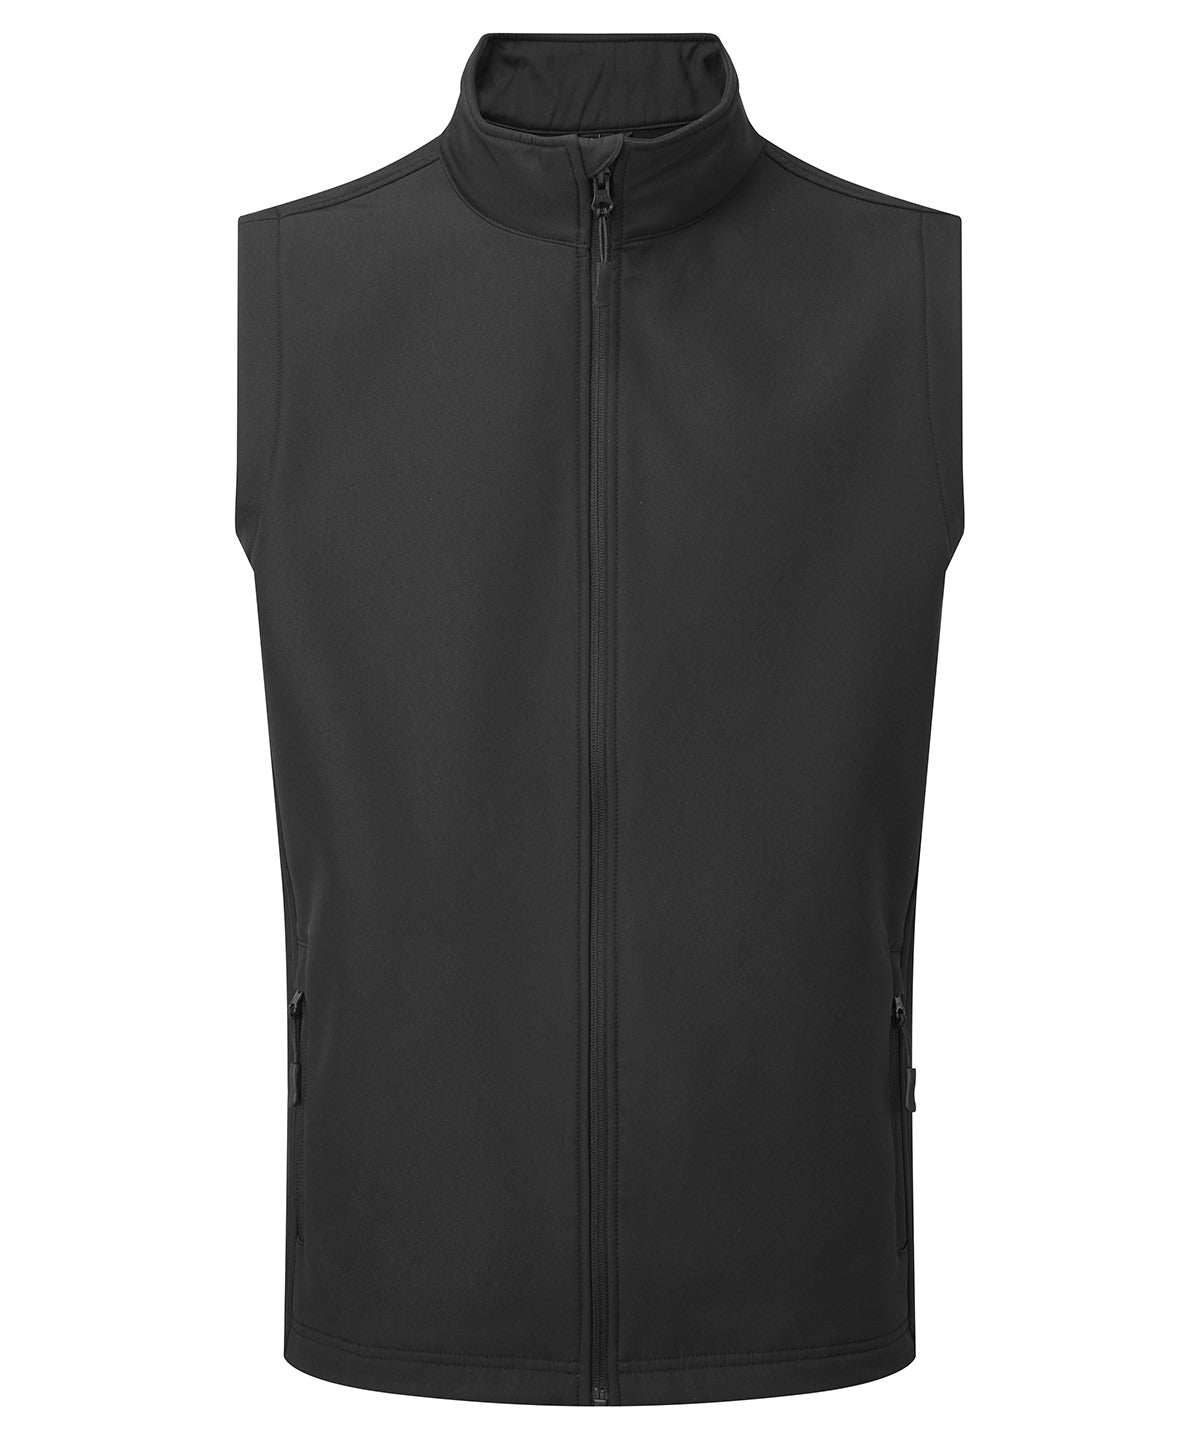 Windchecker® printable and recycled gilet